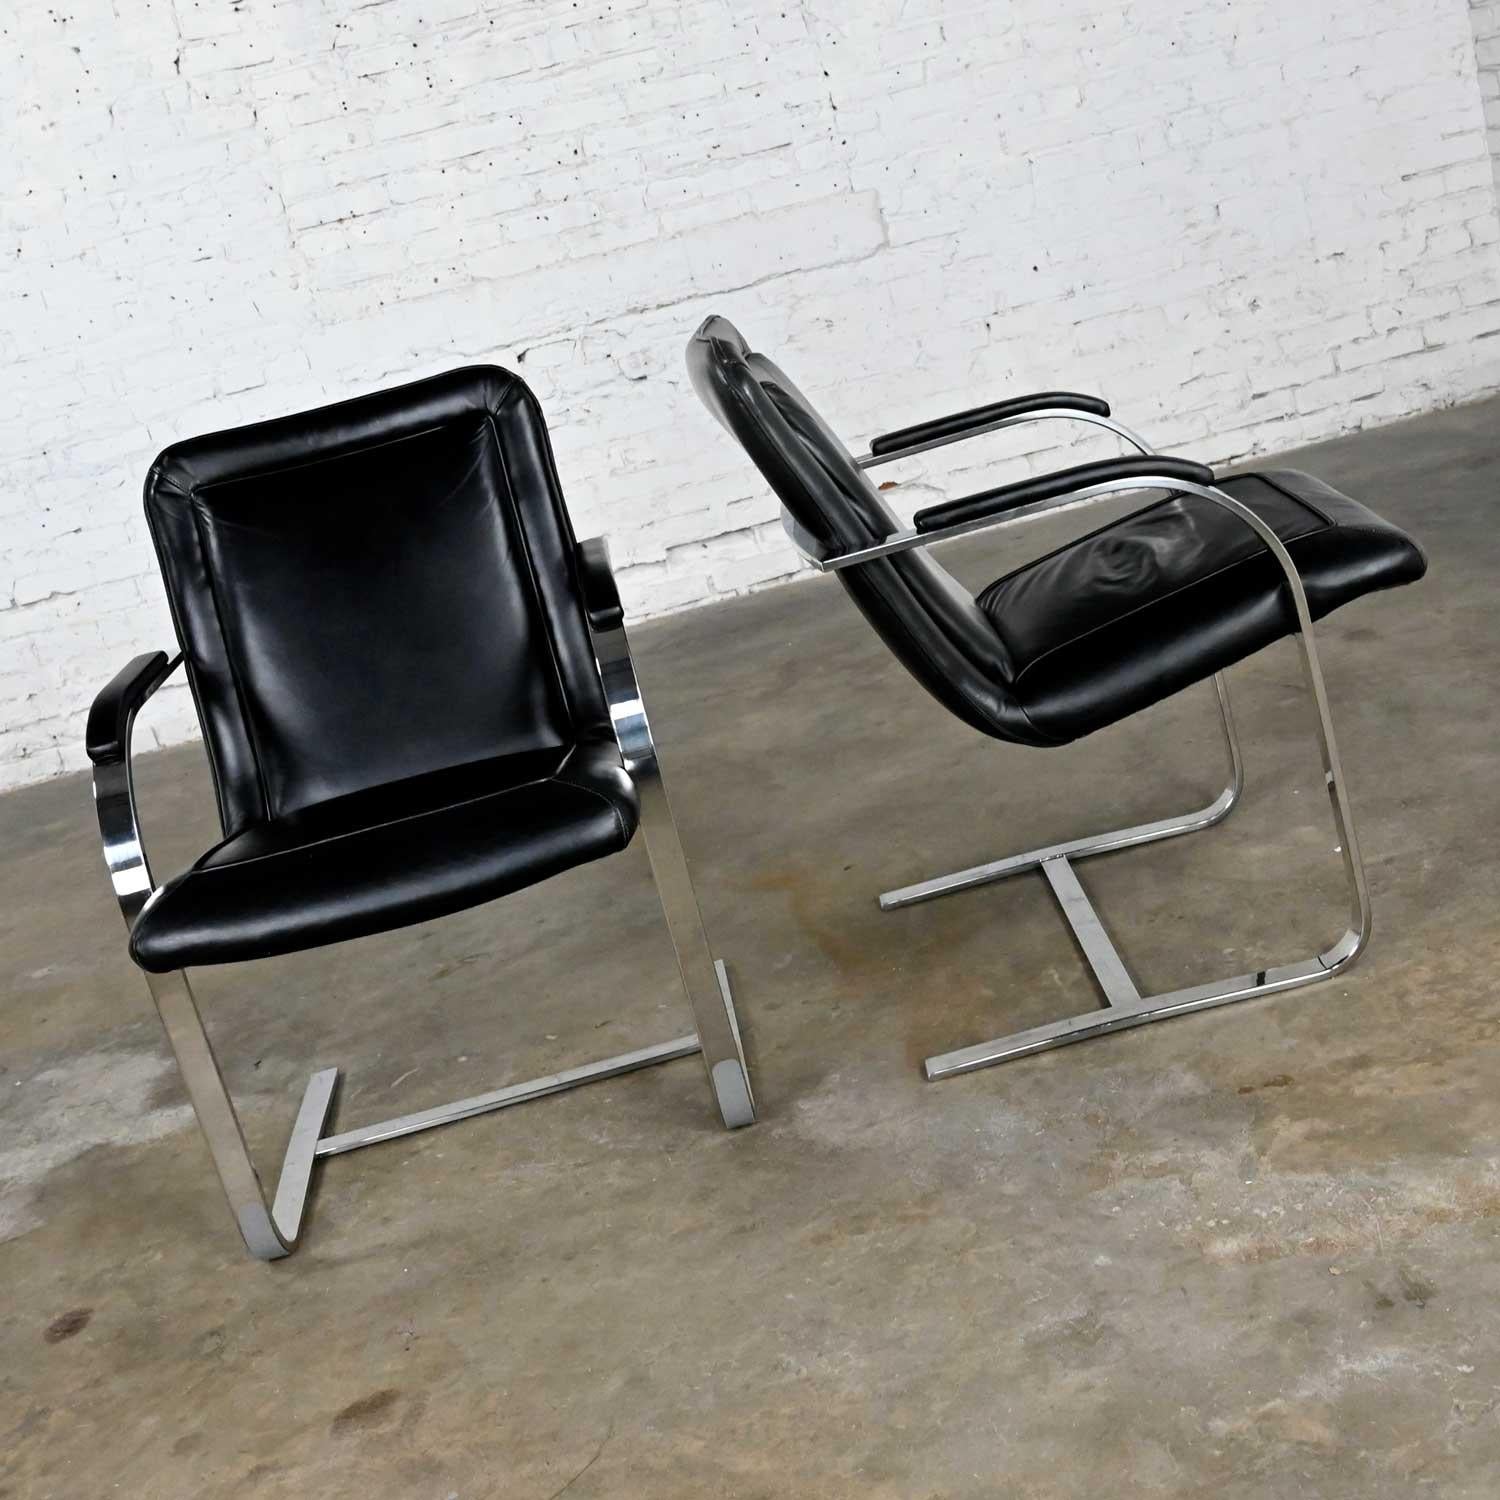 Modern St Timothy Chair Cantilever Chairs Chrome Rectangle Tube & Black Leather In Good Condition For Sale In Topeka, KS